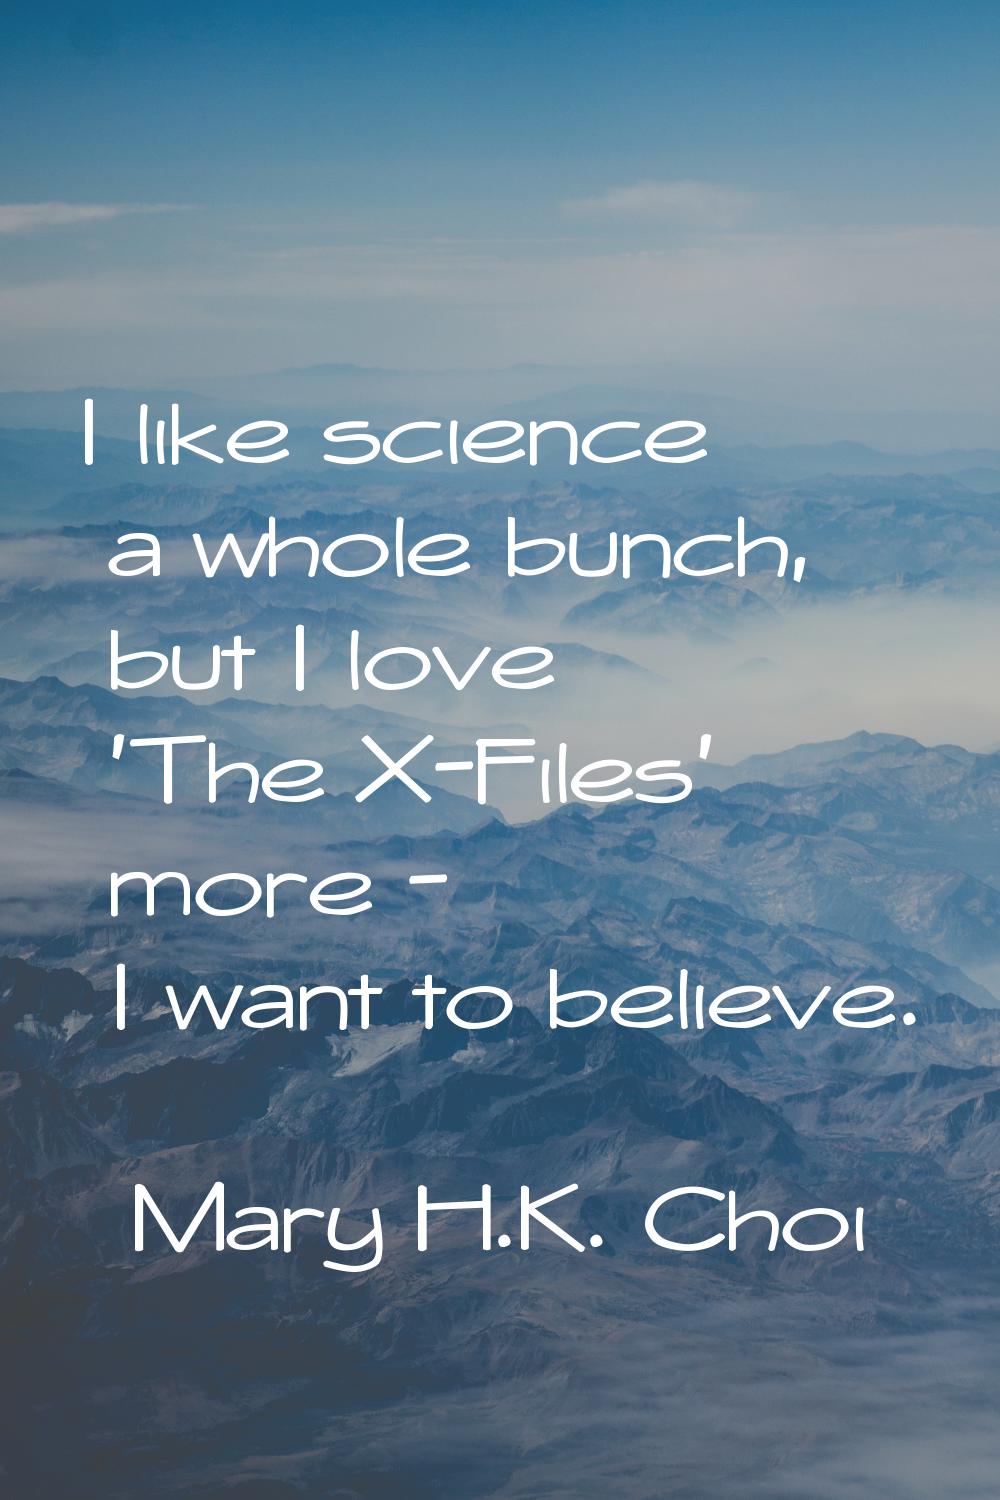 I like science a whole bunch, but I love 'The X-Files' more - I want to believe.